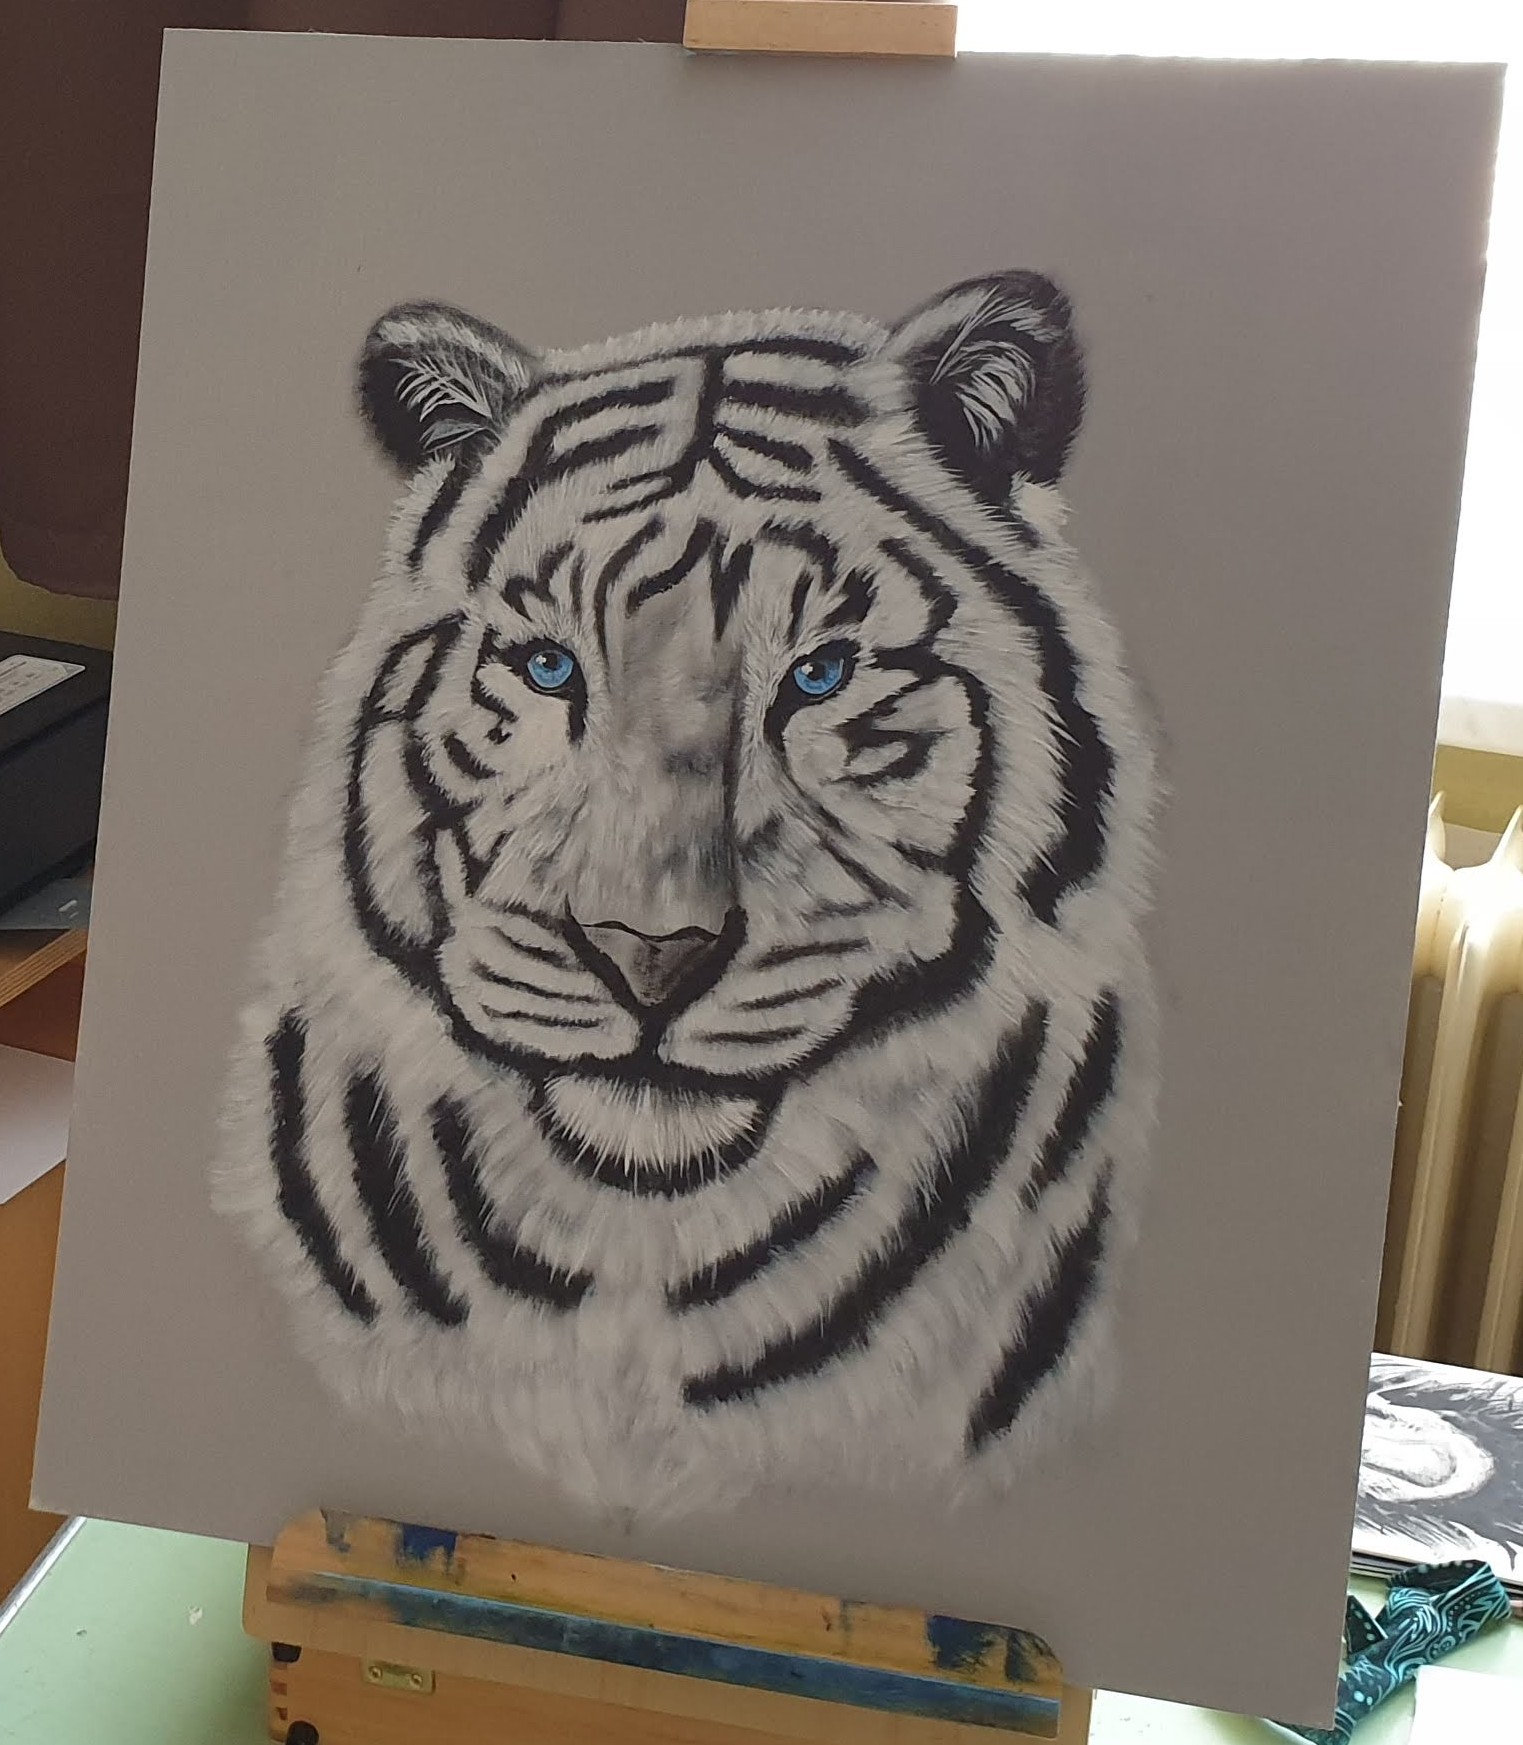 White Tiger without BG. It was not finished yet, there is several next modifs.